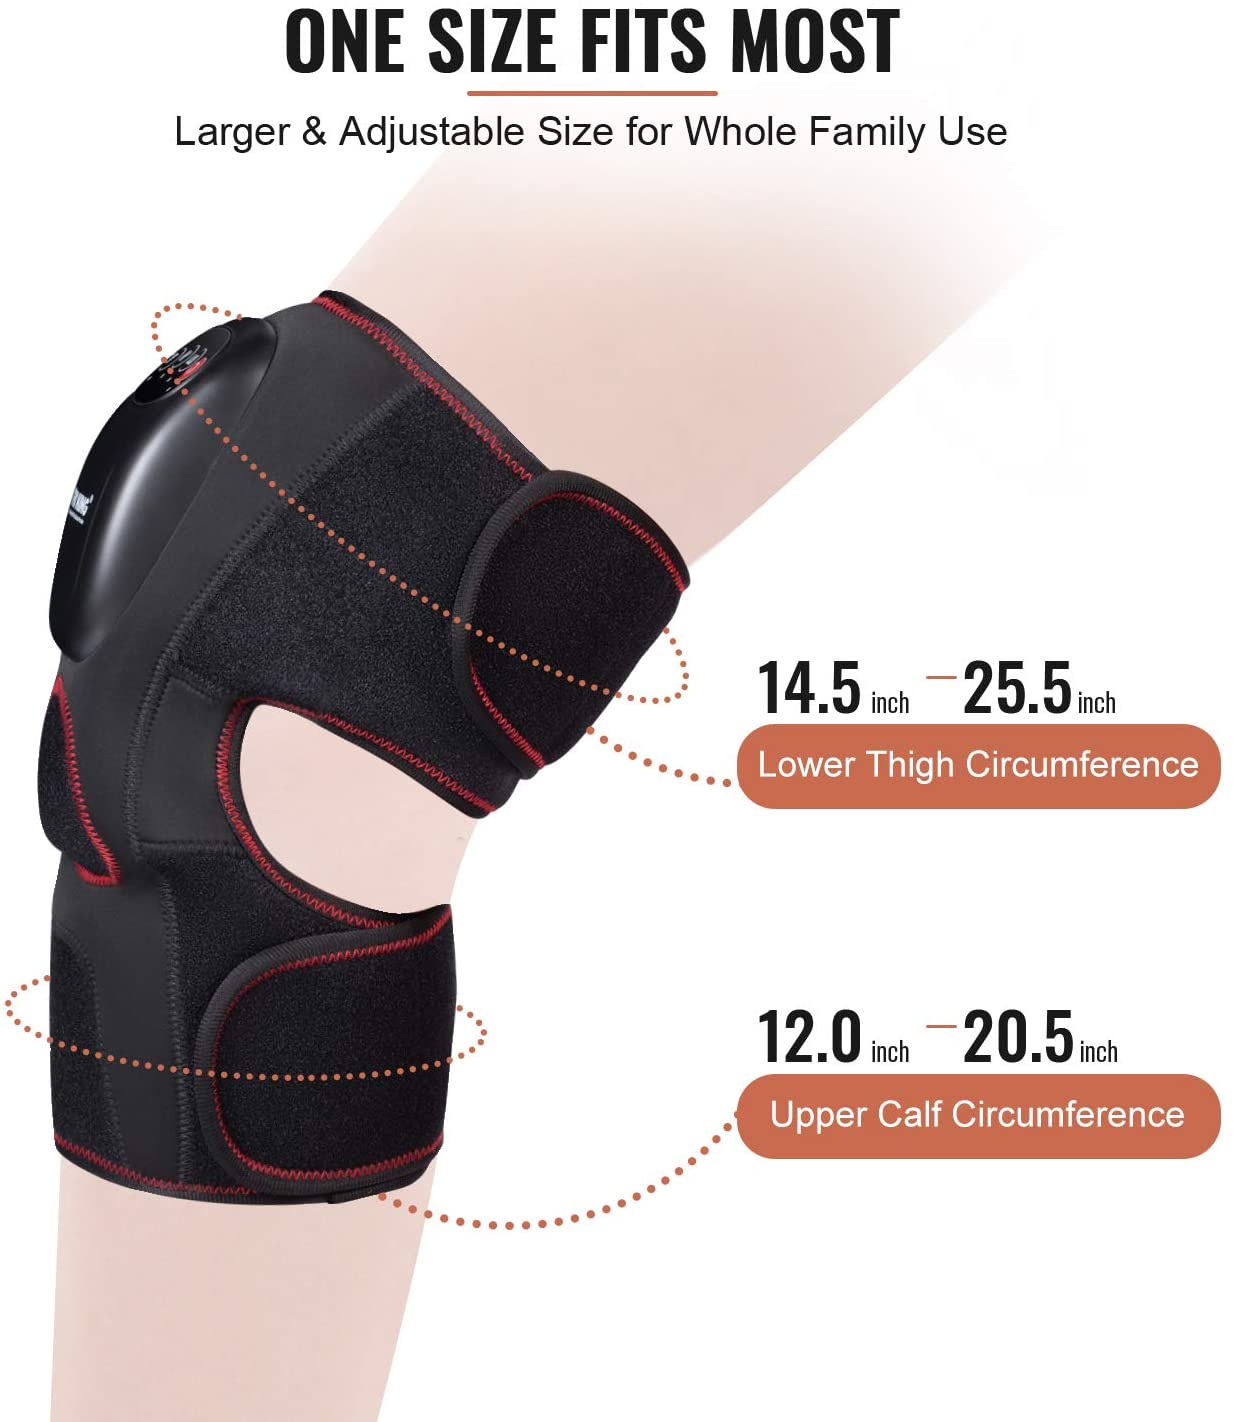 FT-032K - Compression Knee Massager with Heat